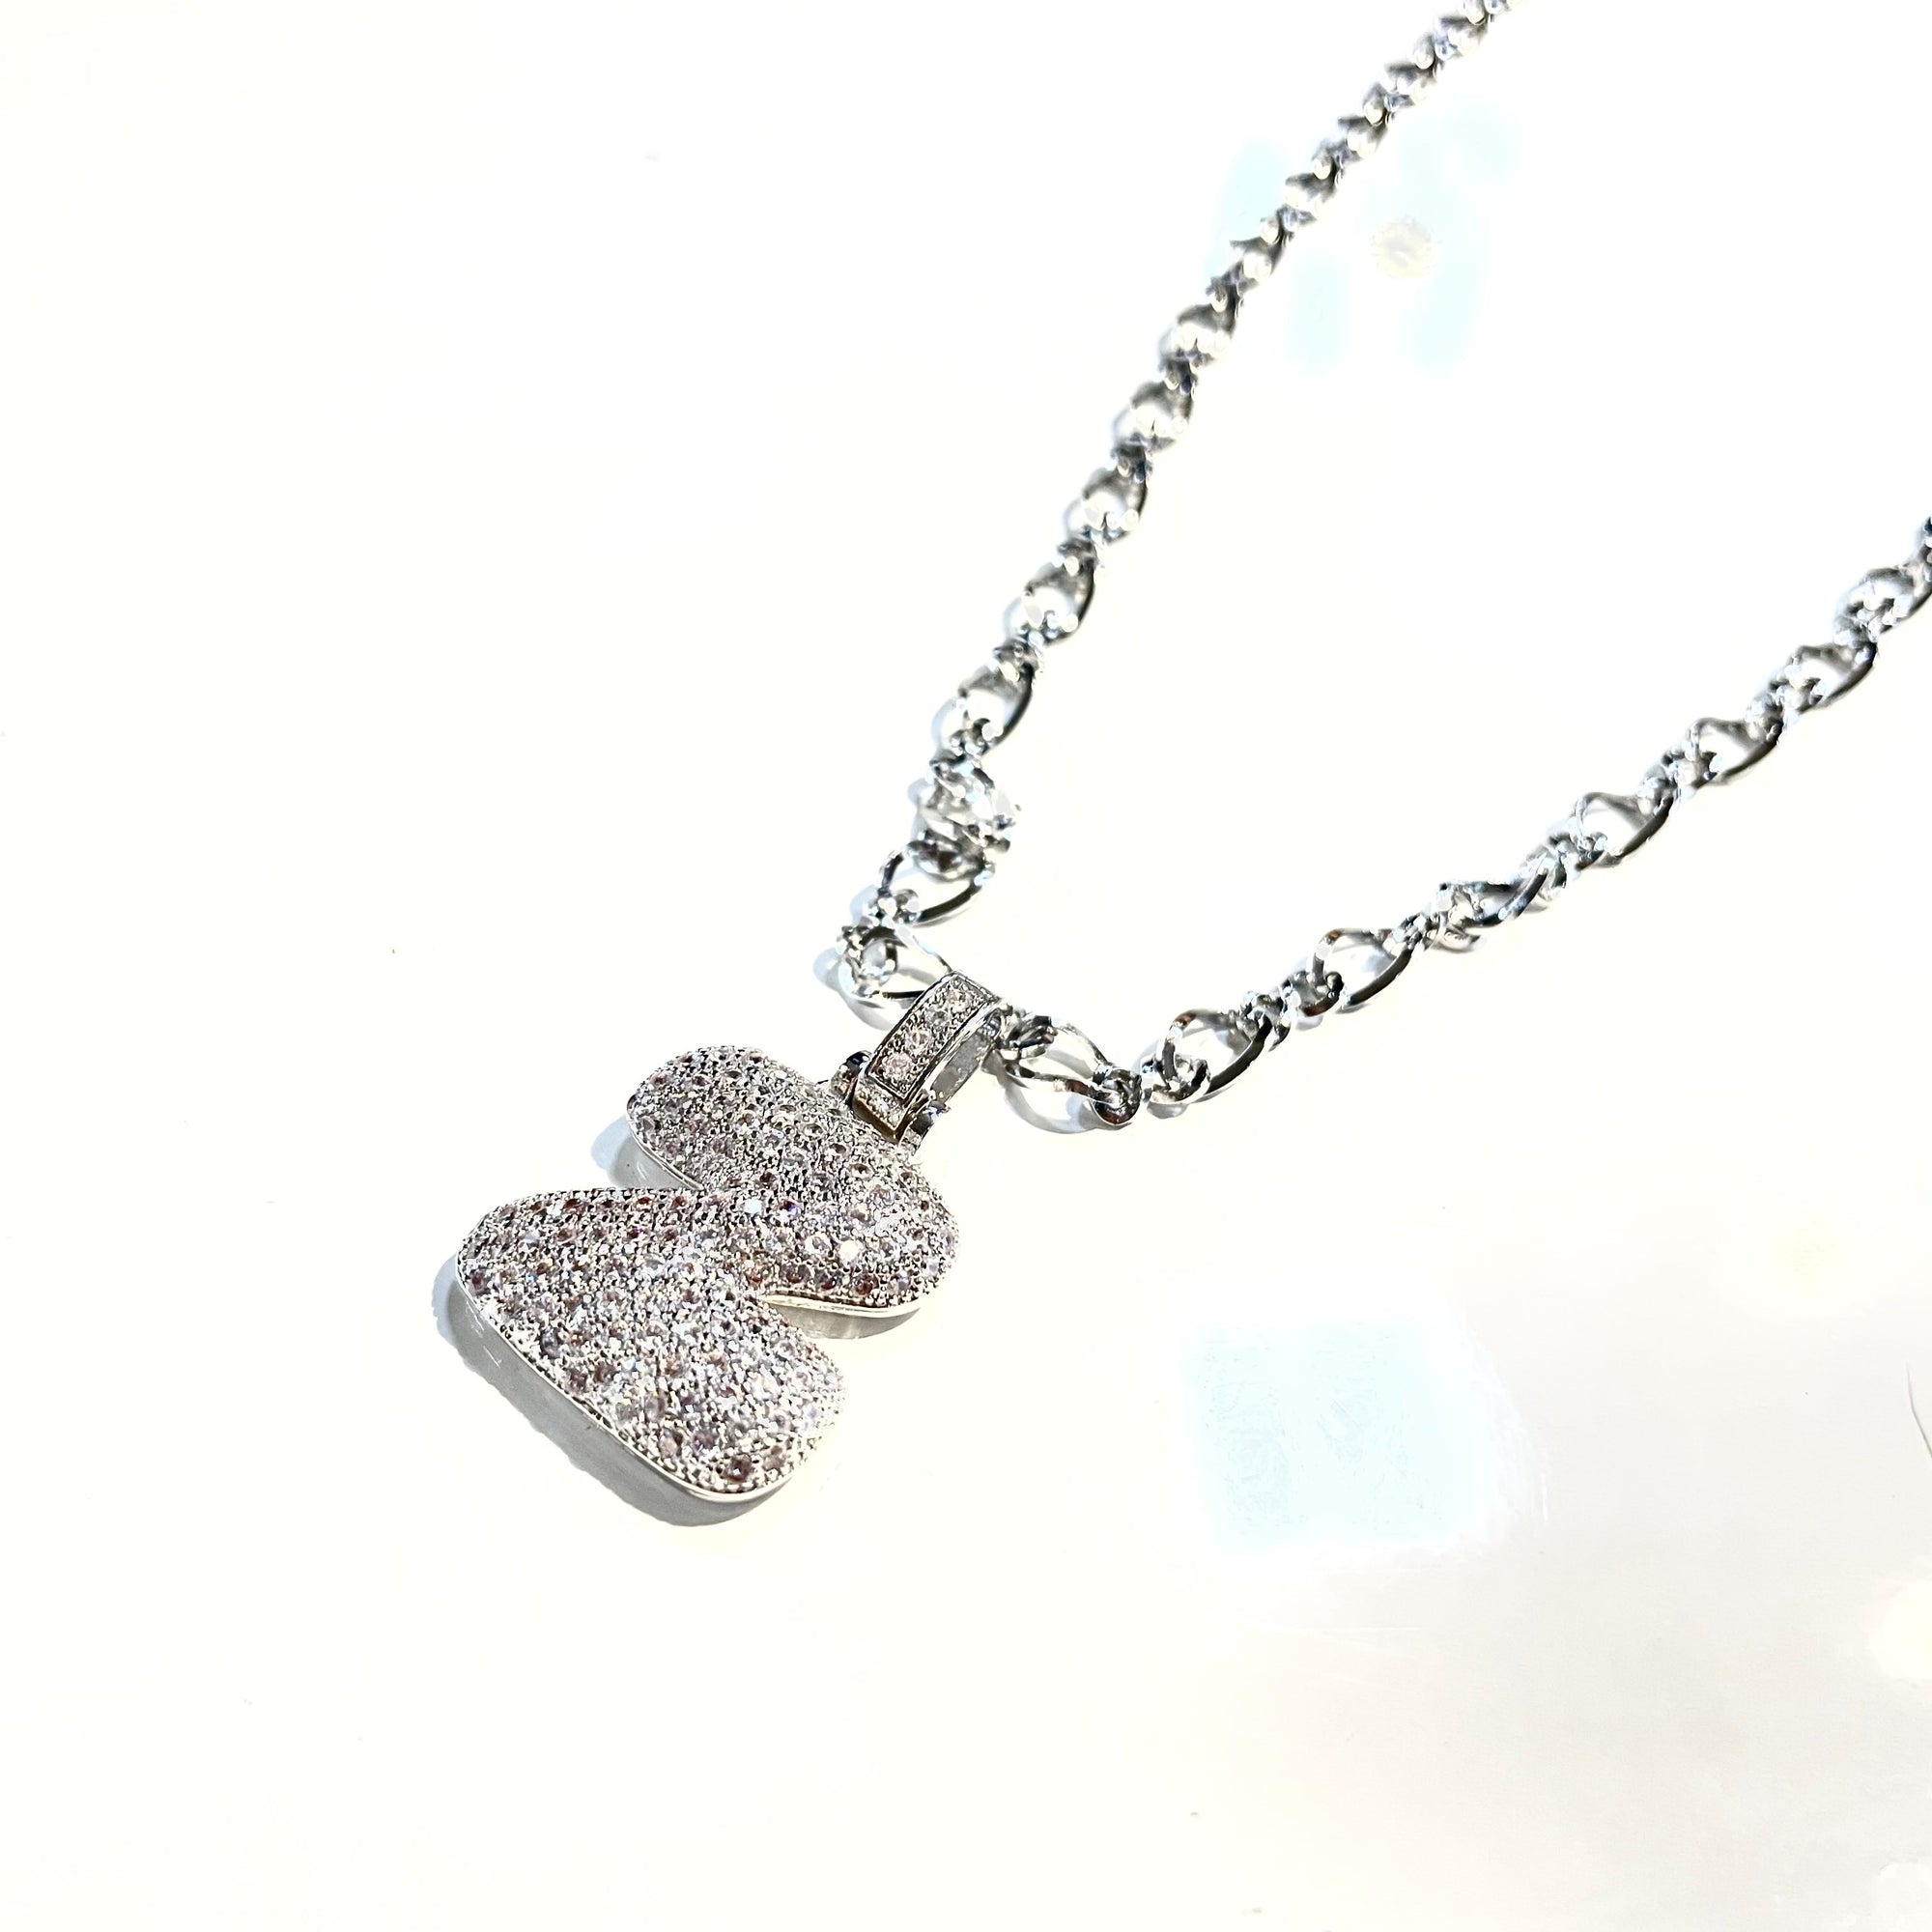 Initial Impression Necklace Necklaces Cerese D, Inc. Silver Z 